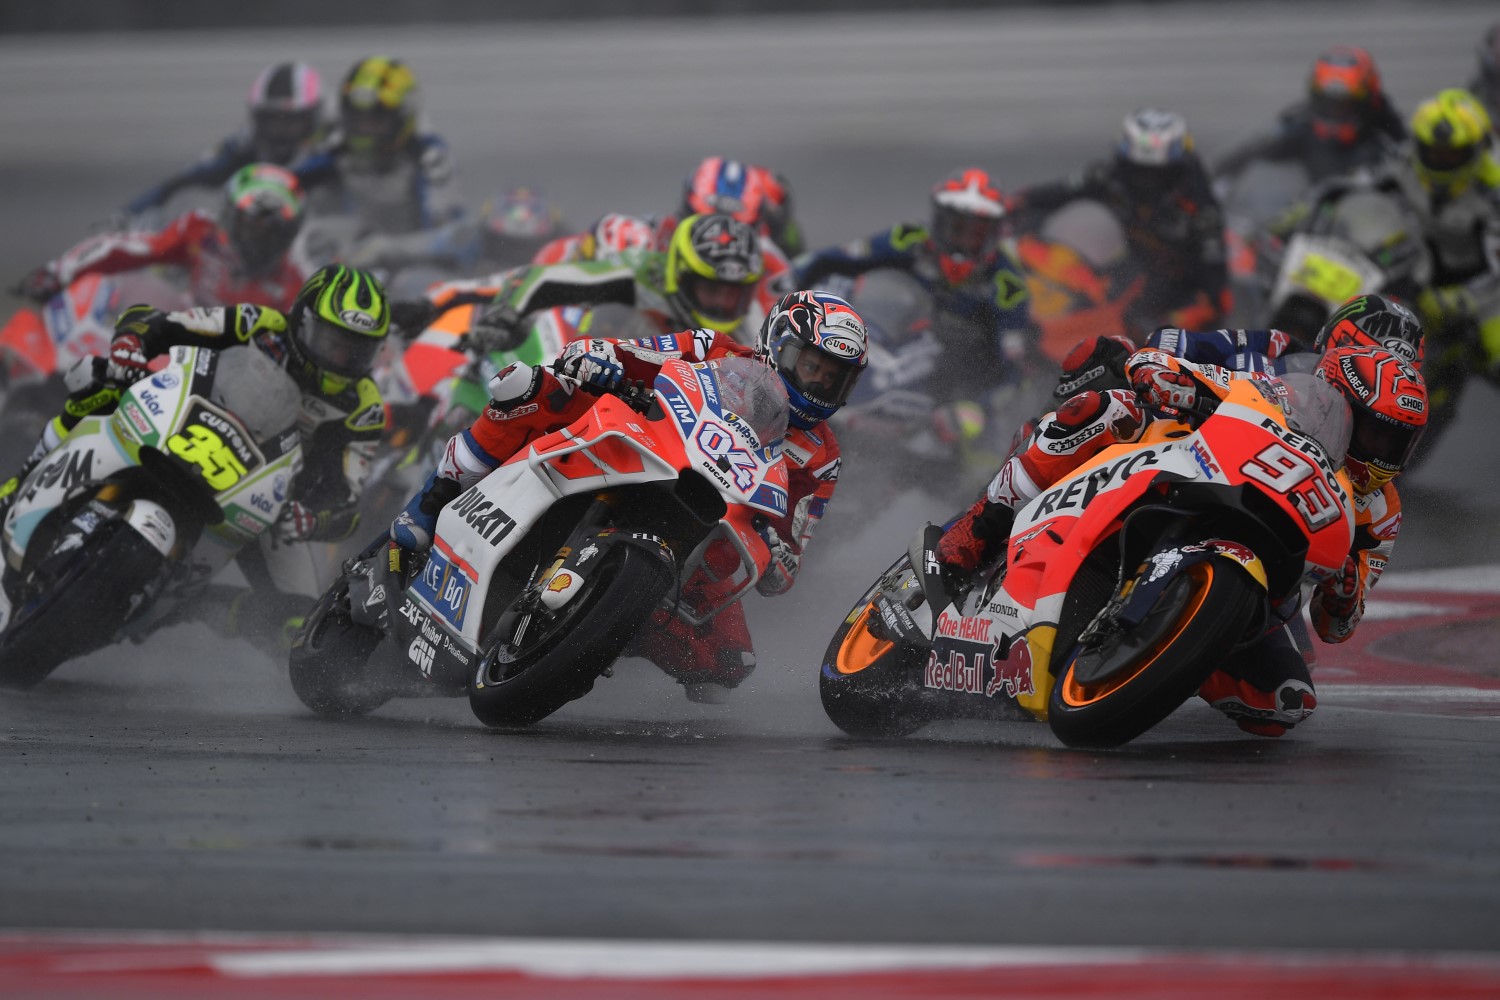 Marquez leads at the start